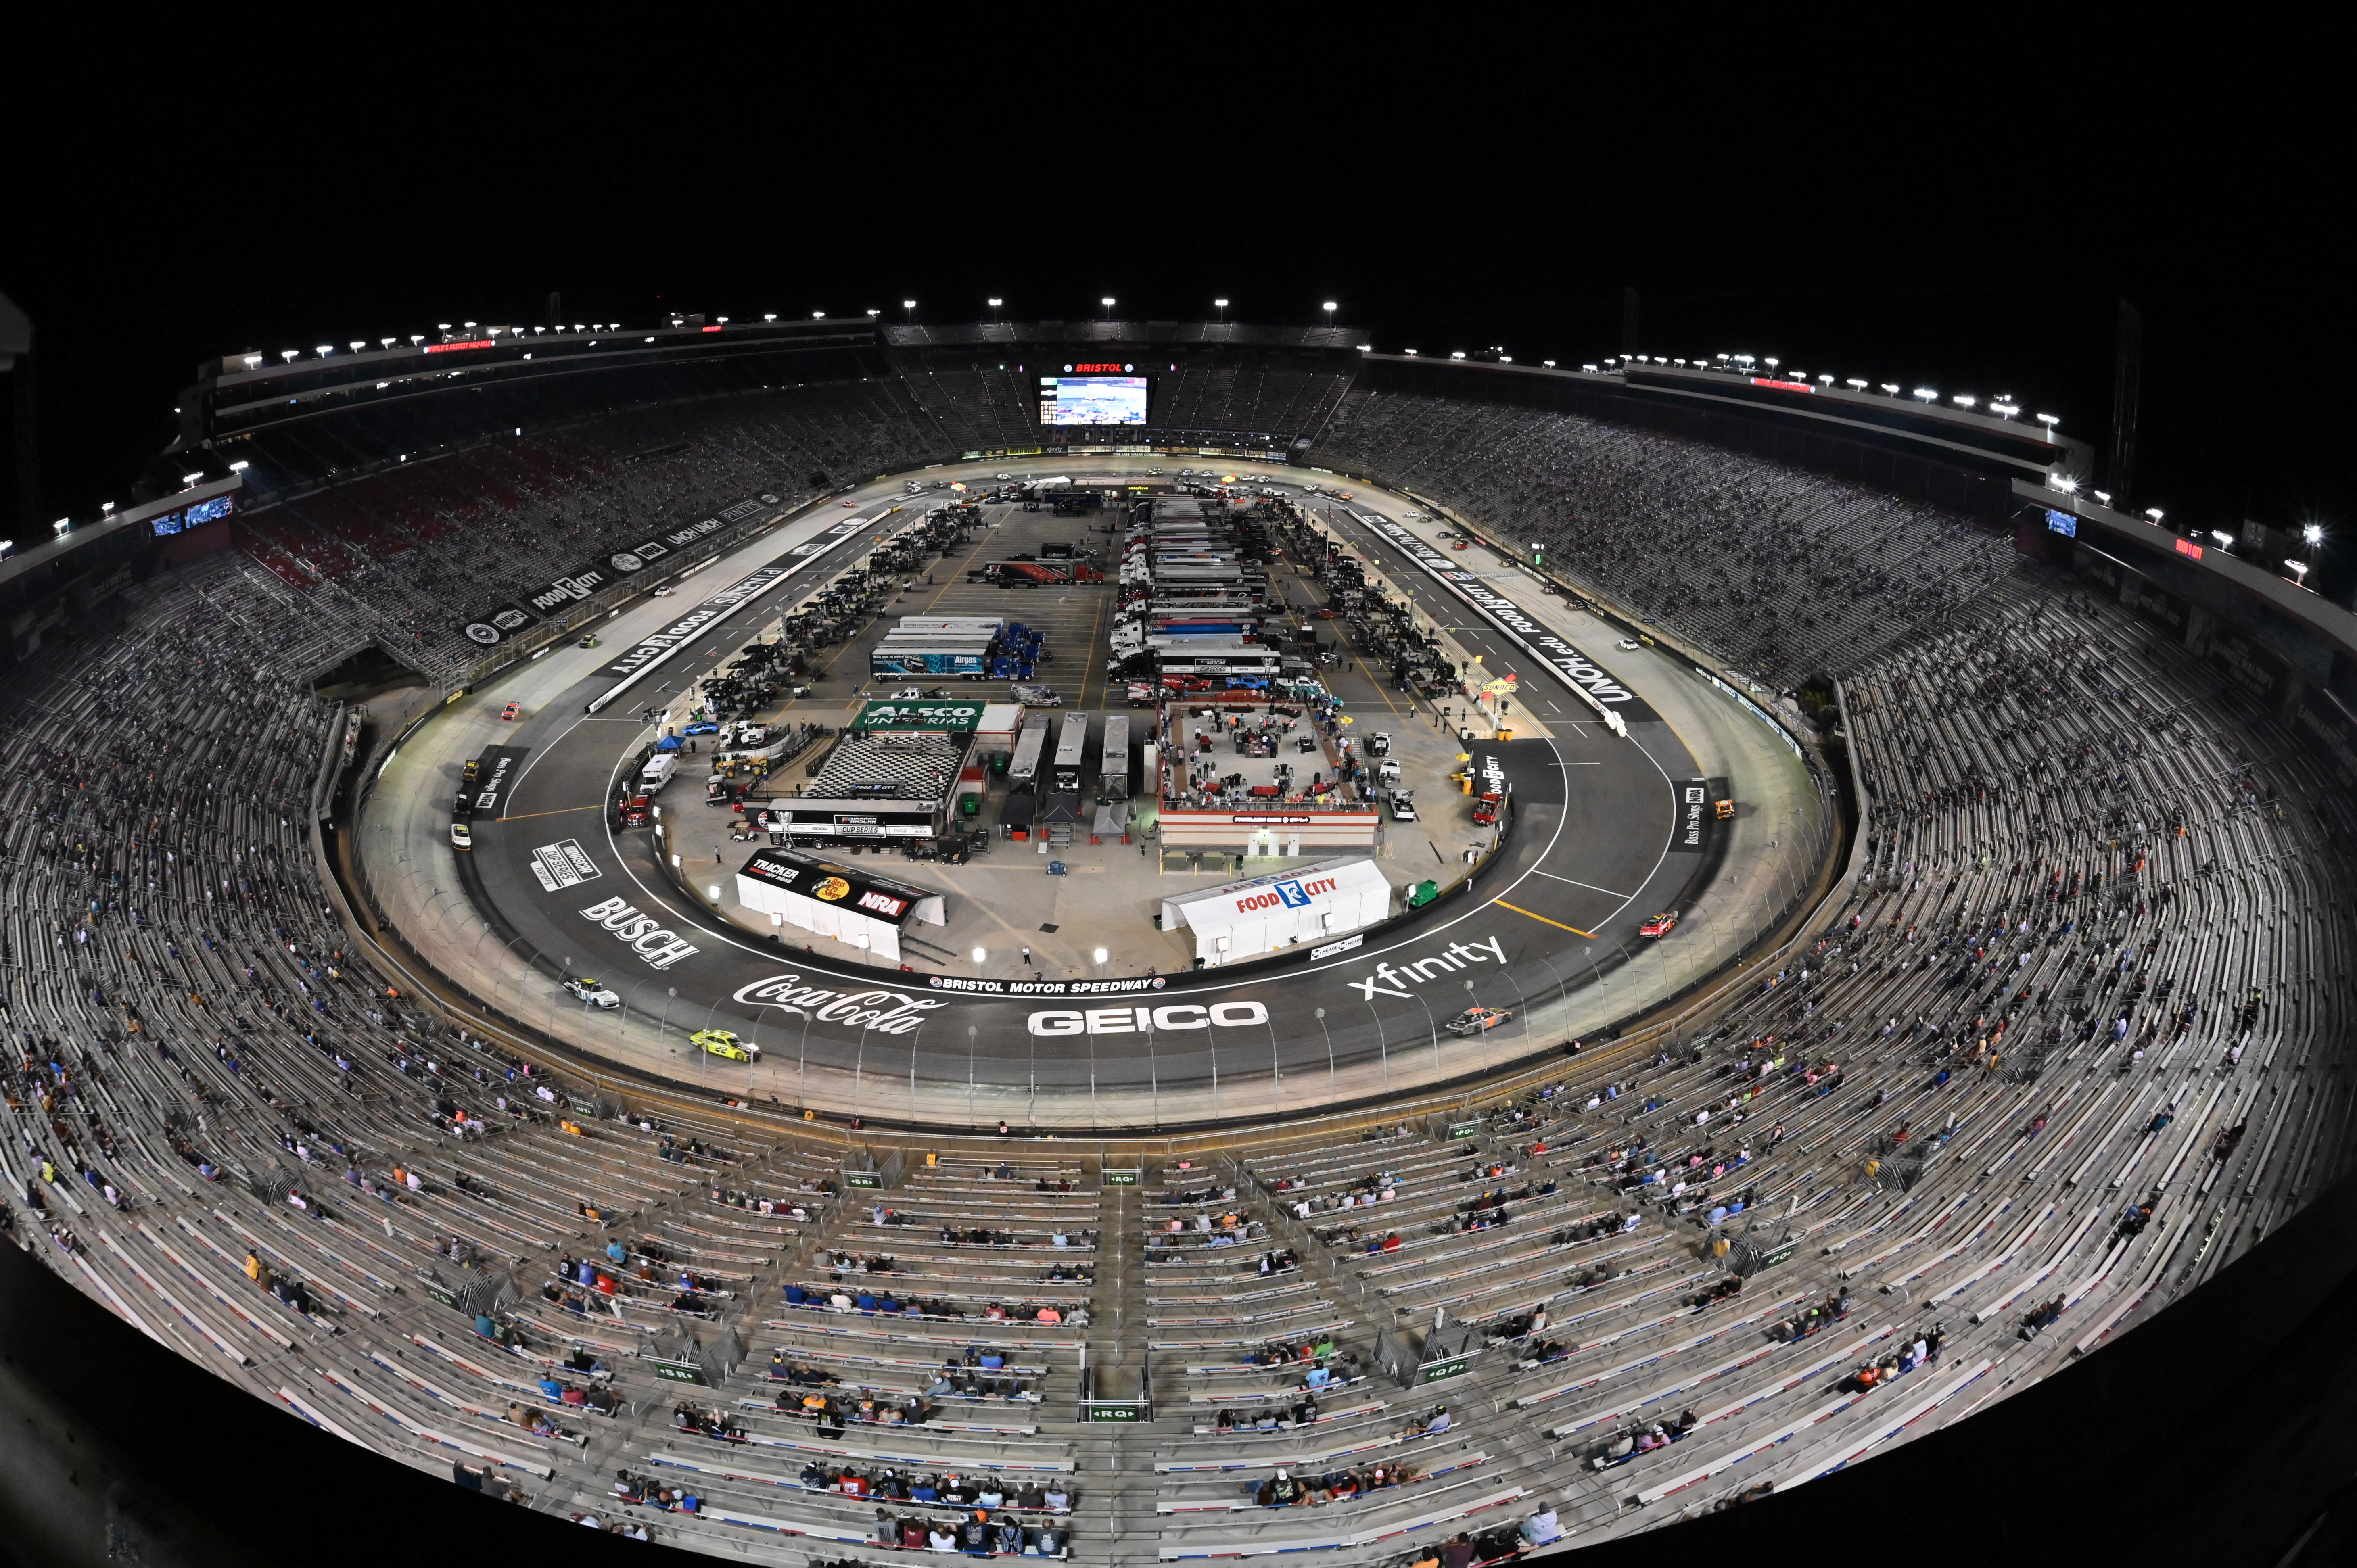 A general view of Bristol Moto Speedway during the NASCAR Xfinity Series Food City 300 at Bristol Motor Speedway in Bristol, TN.